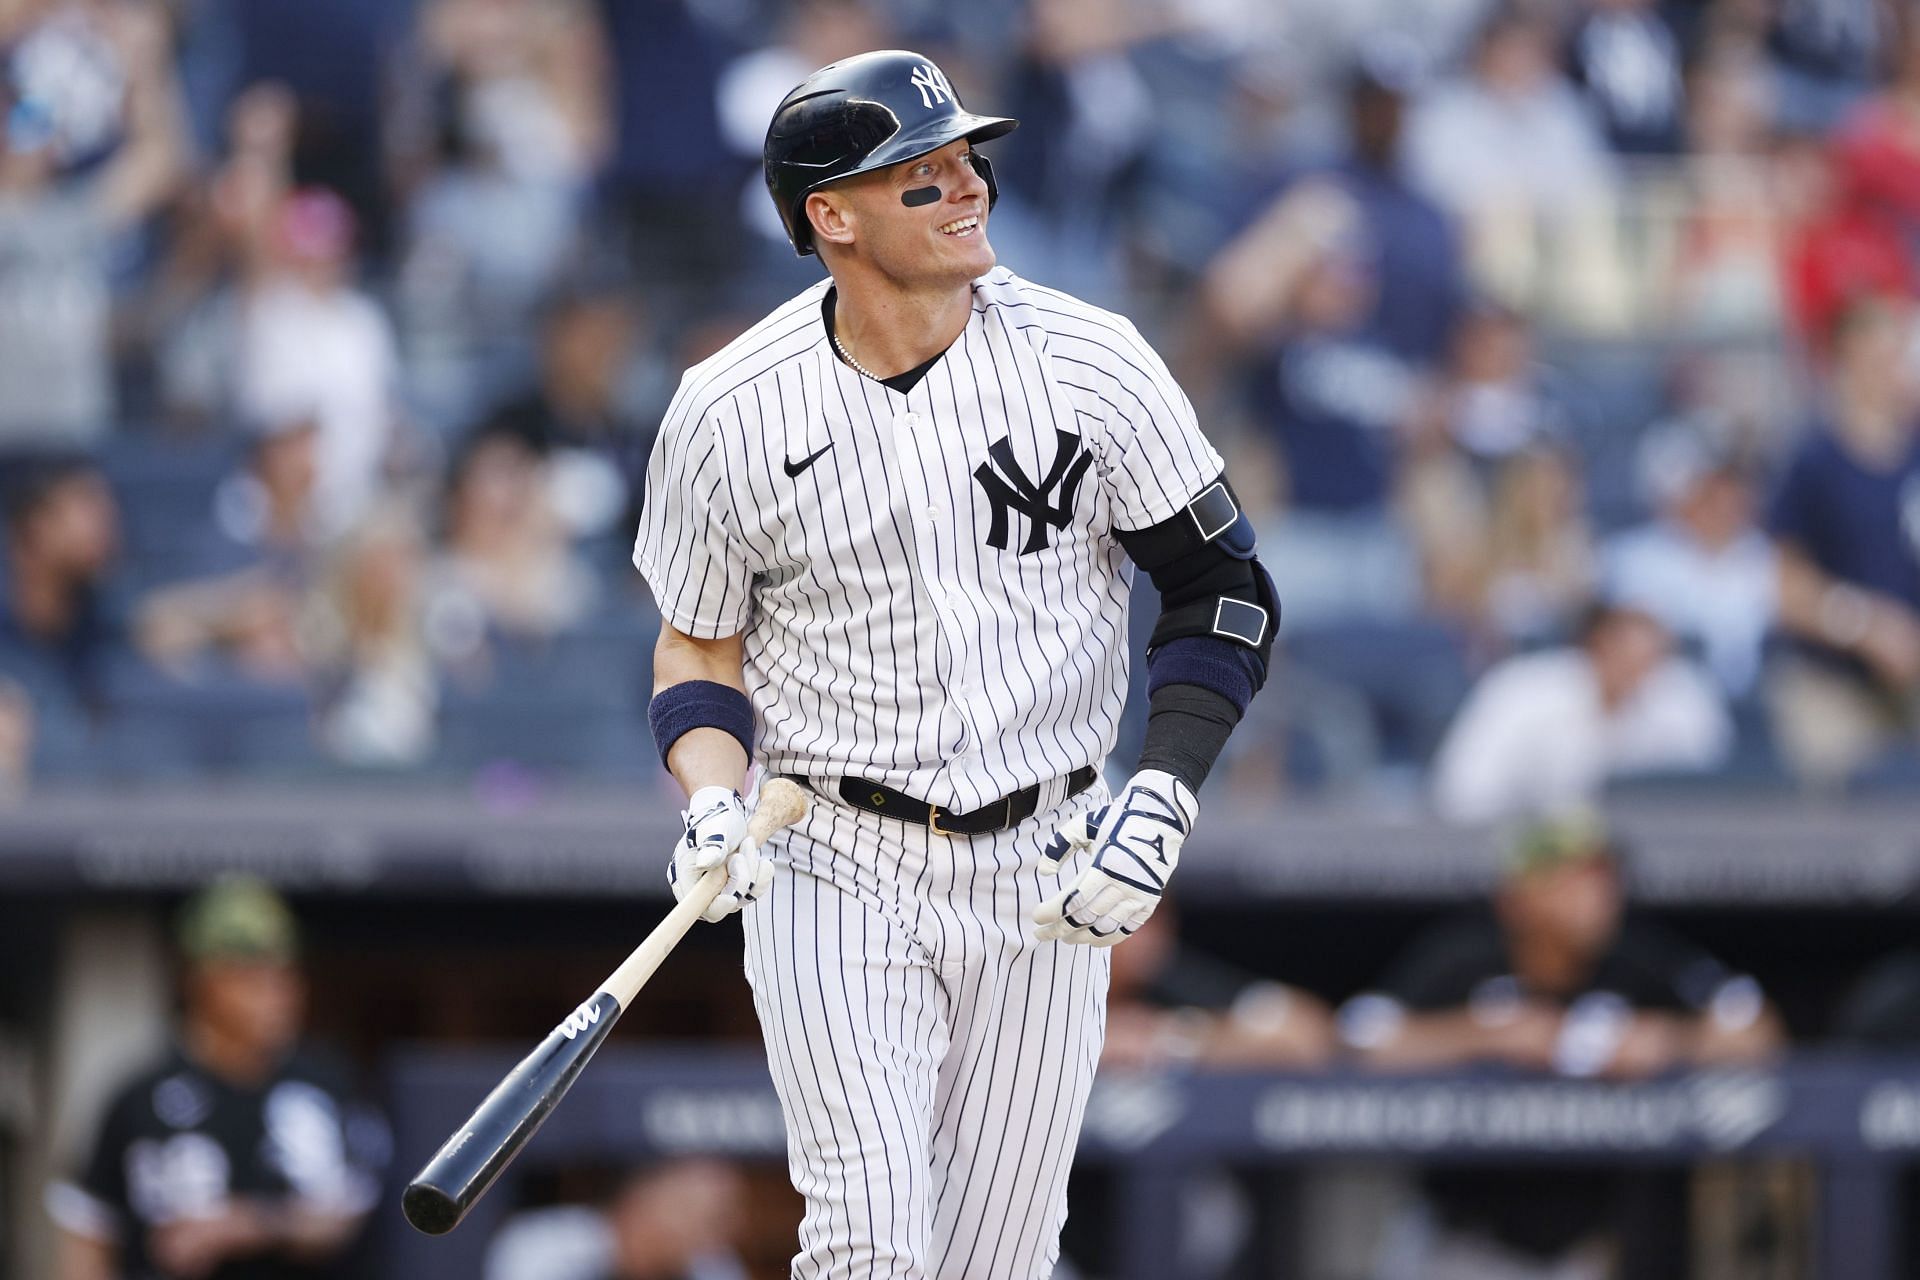 New York Yankees third baseman Josh Donaldson hit a ground-rule double in the second inning of today&#039;s game against the Houston Astros.